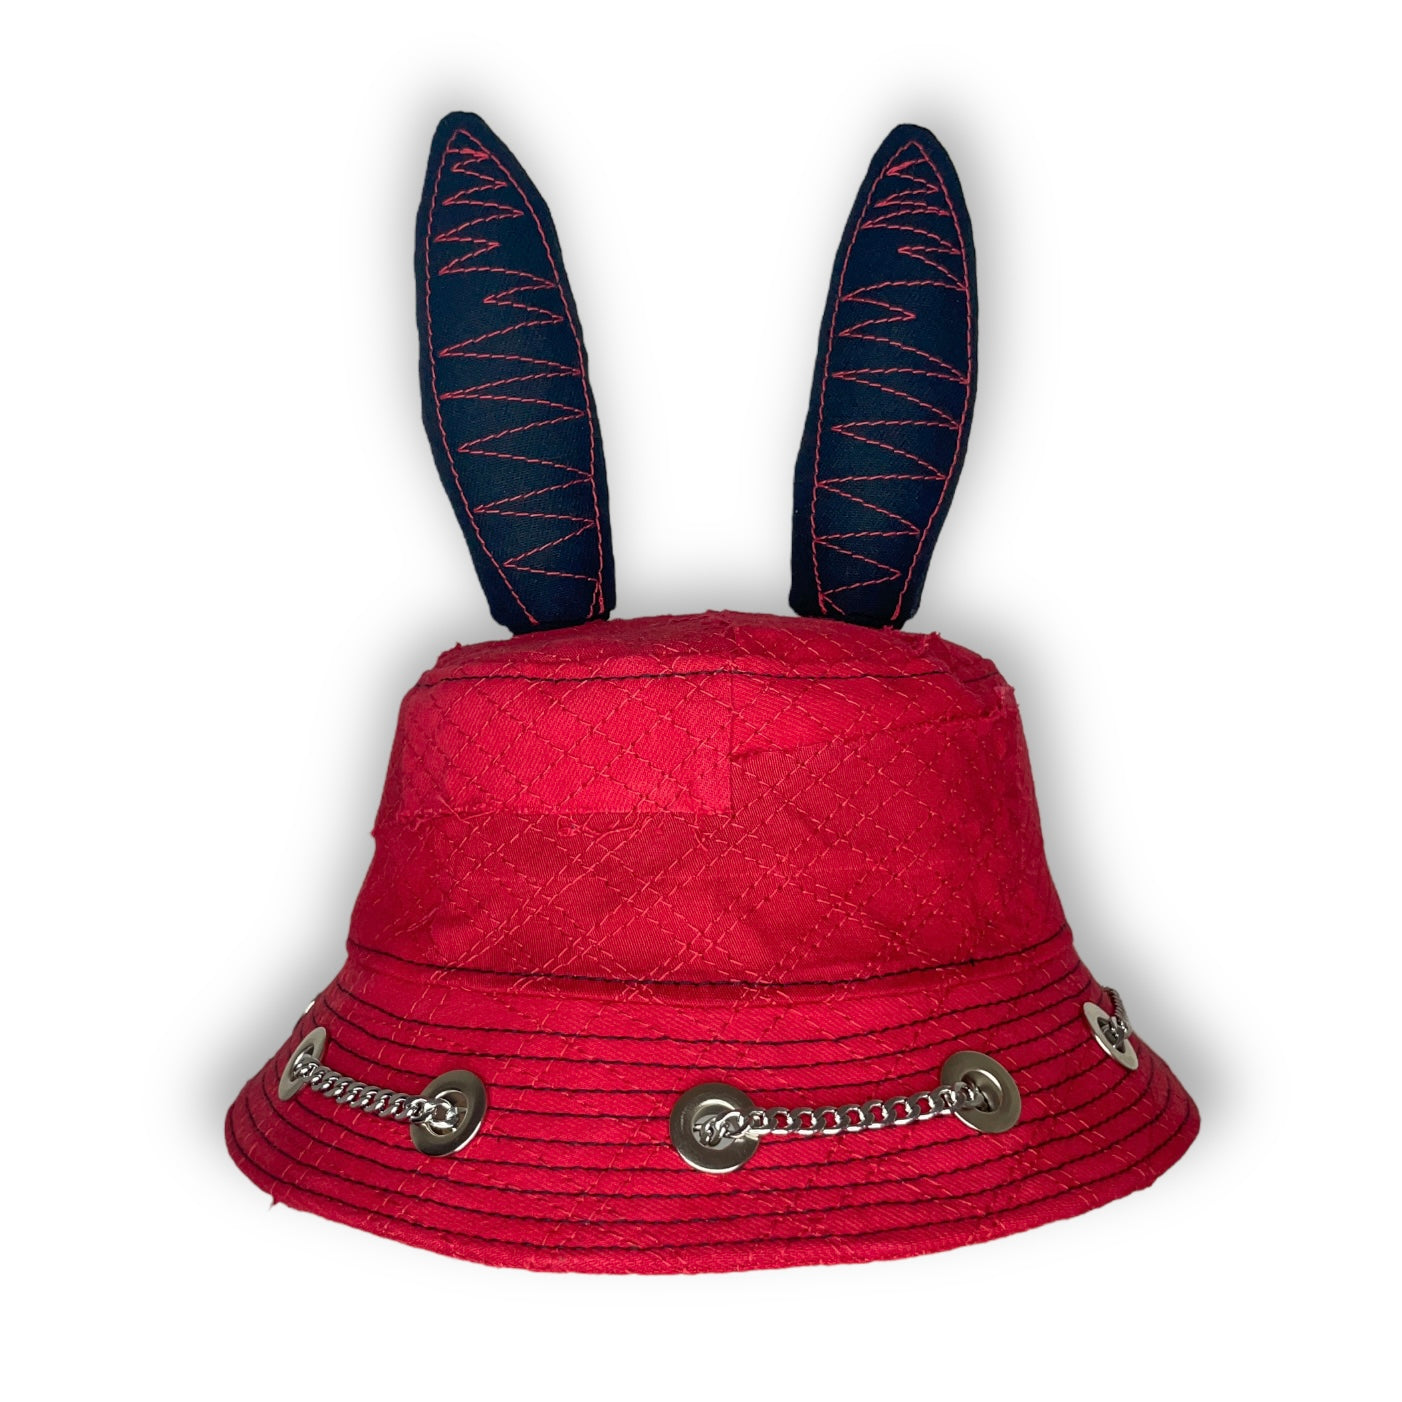 Red and Black Bunny Hat 1of1